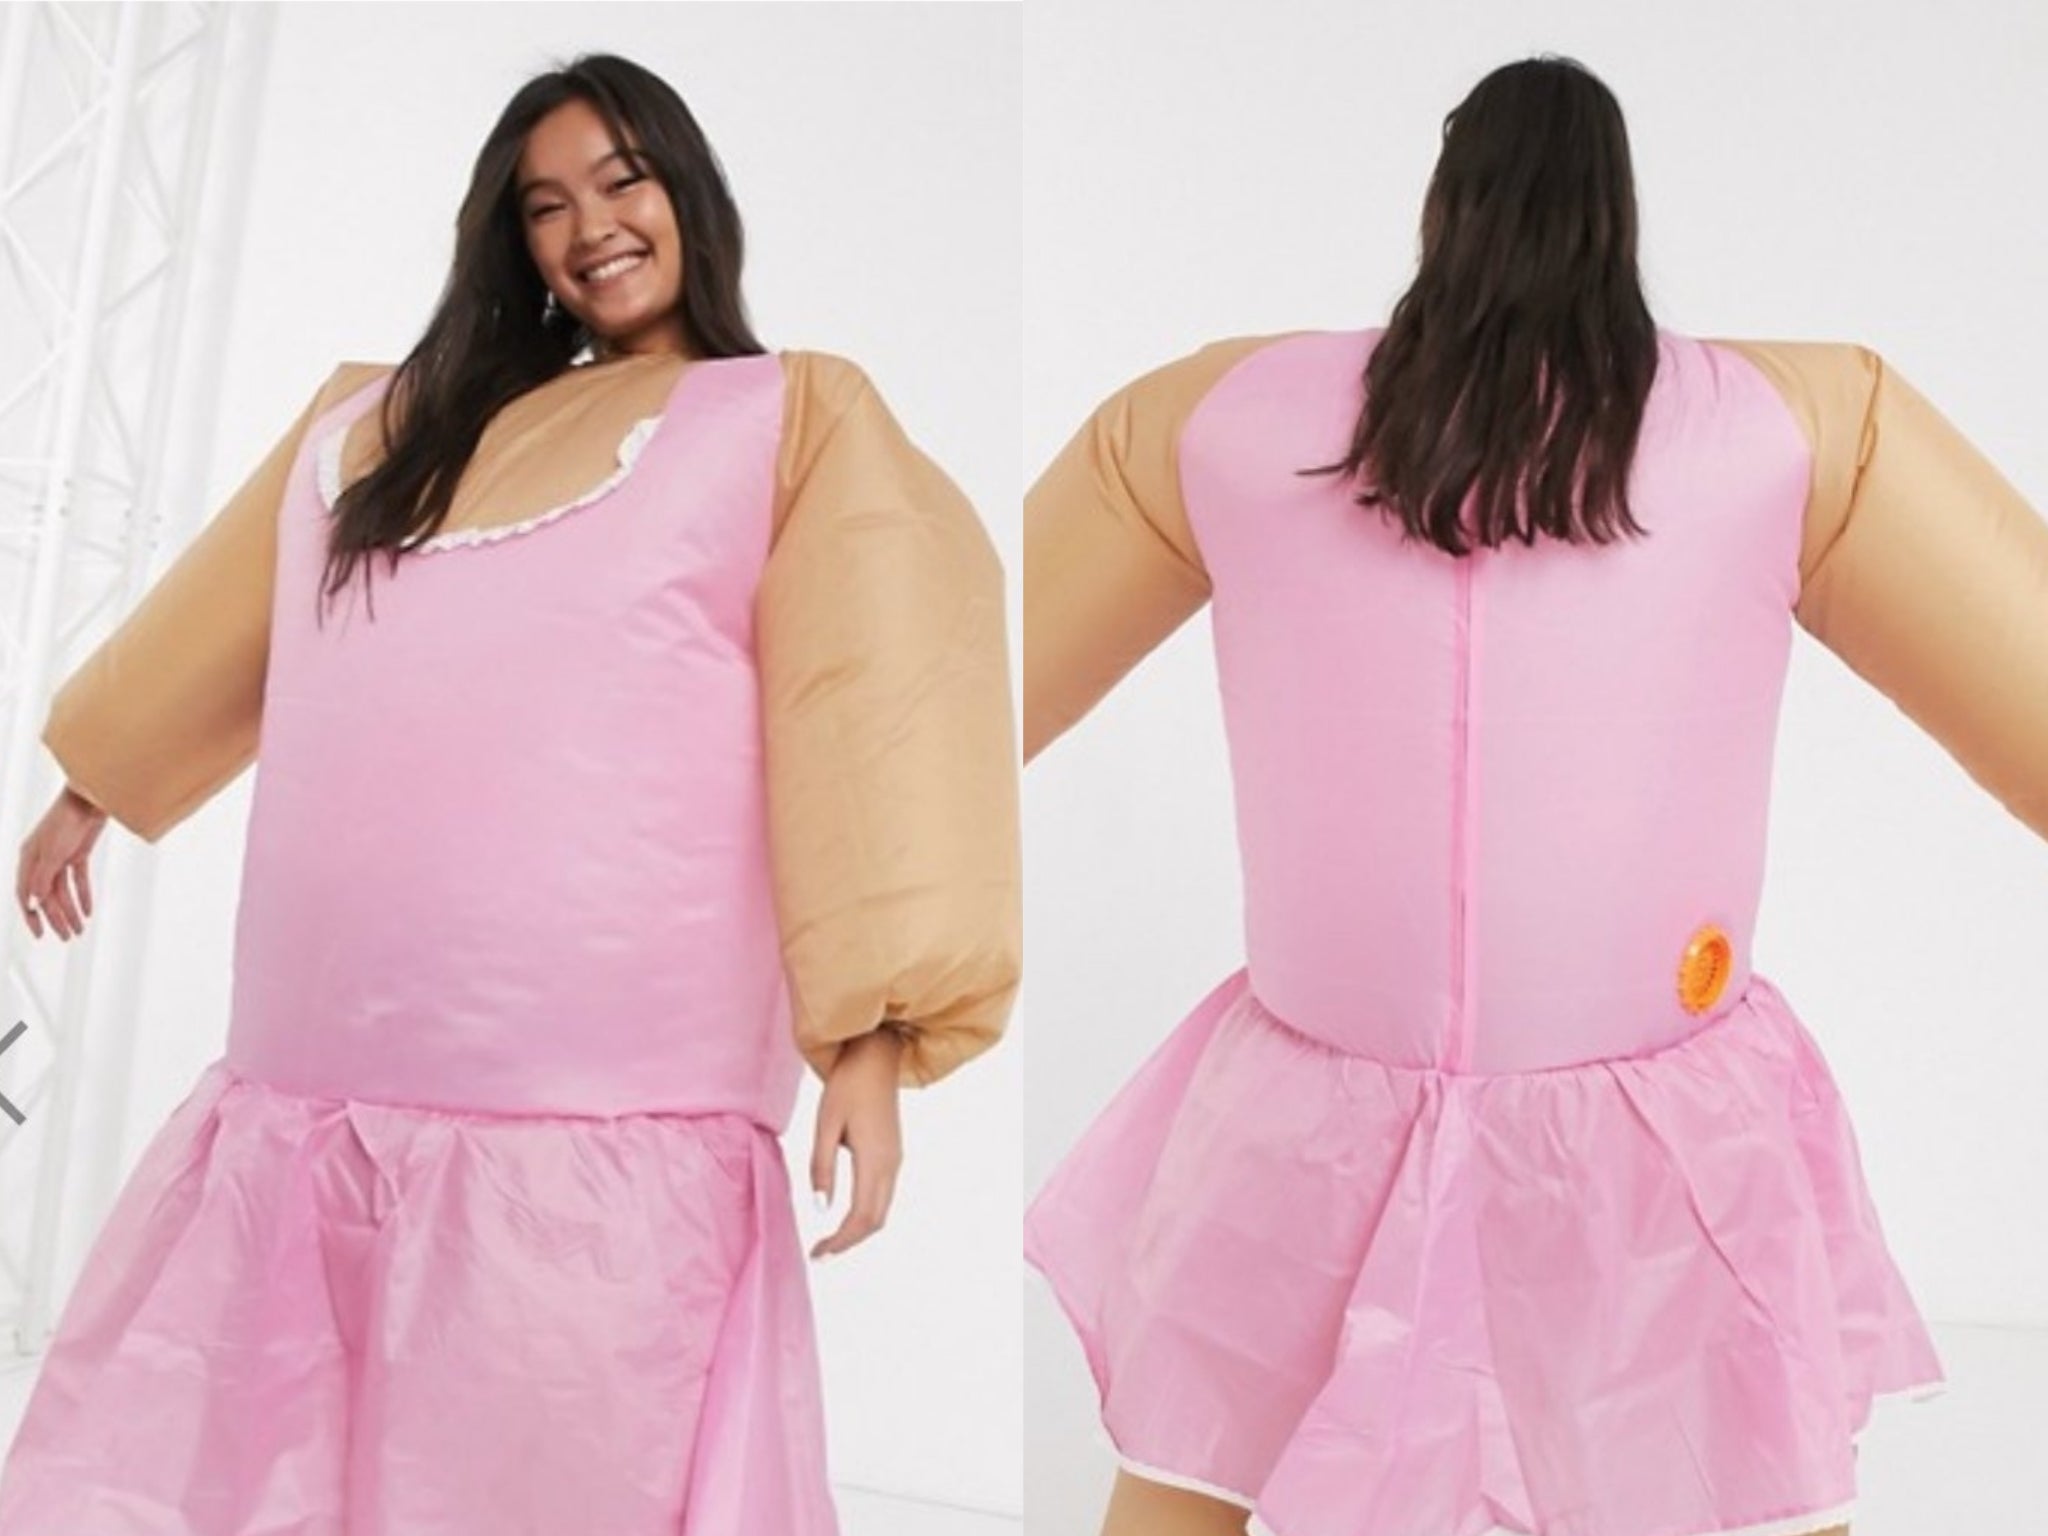 Asos apologises after being accused of 'laughing' at plus-size bodies with  ballerina fat suit game, The Independent